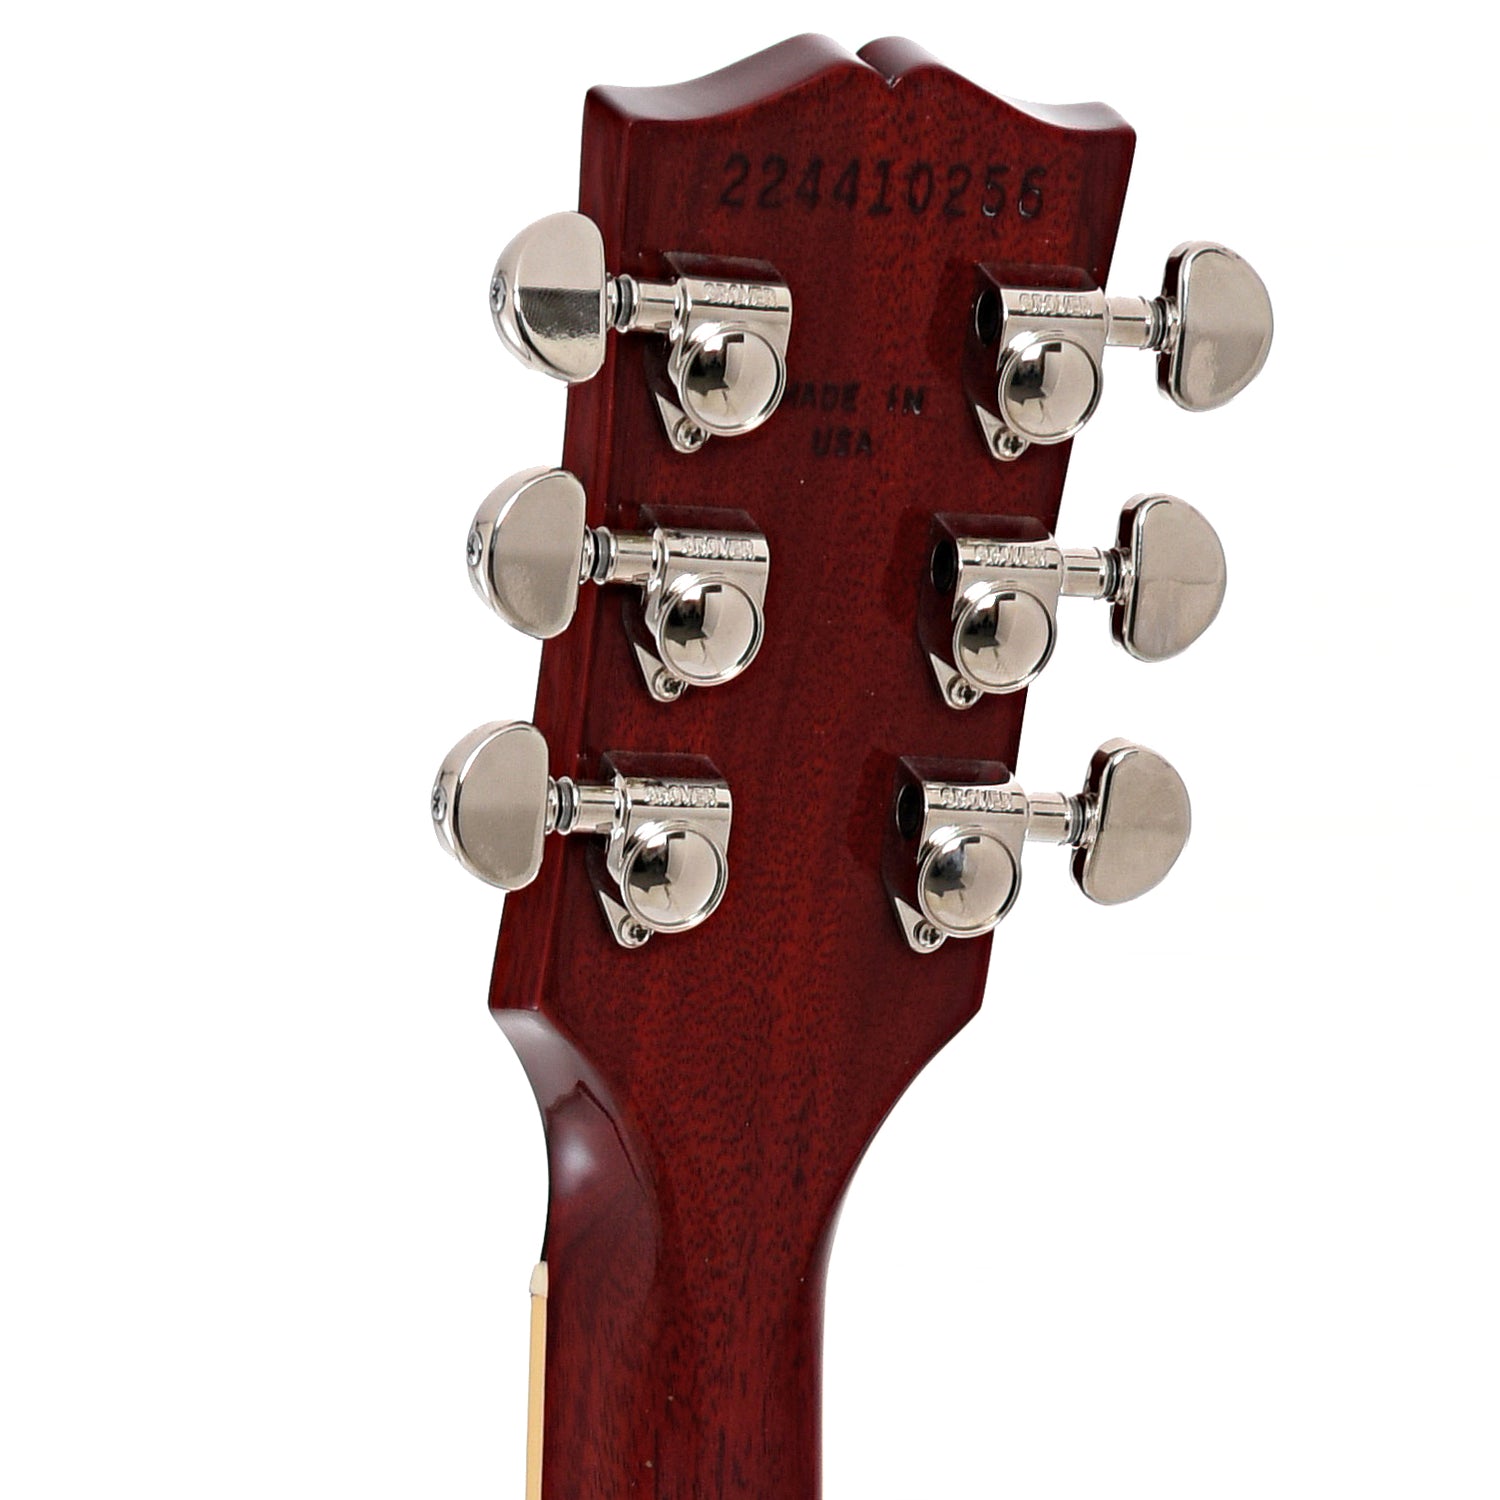 Back headstock of Gibson Les Paul Classic